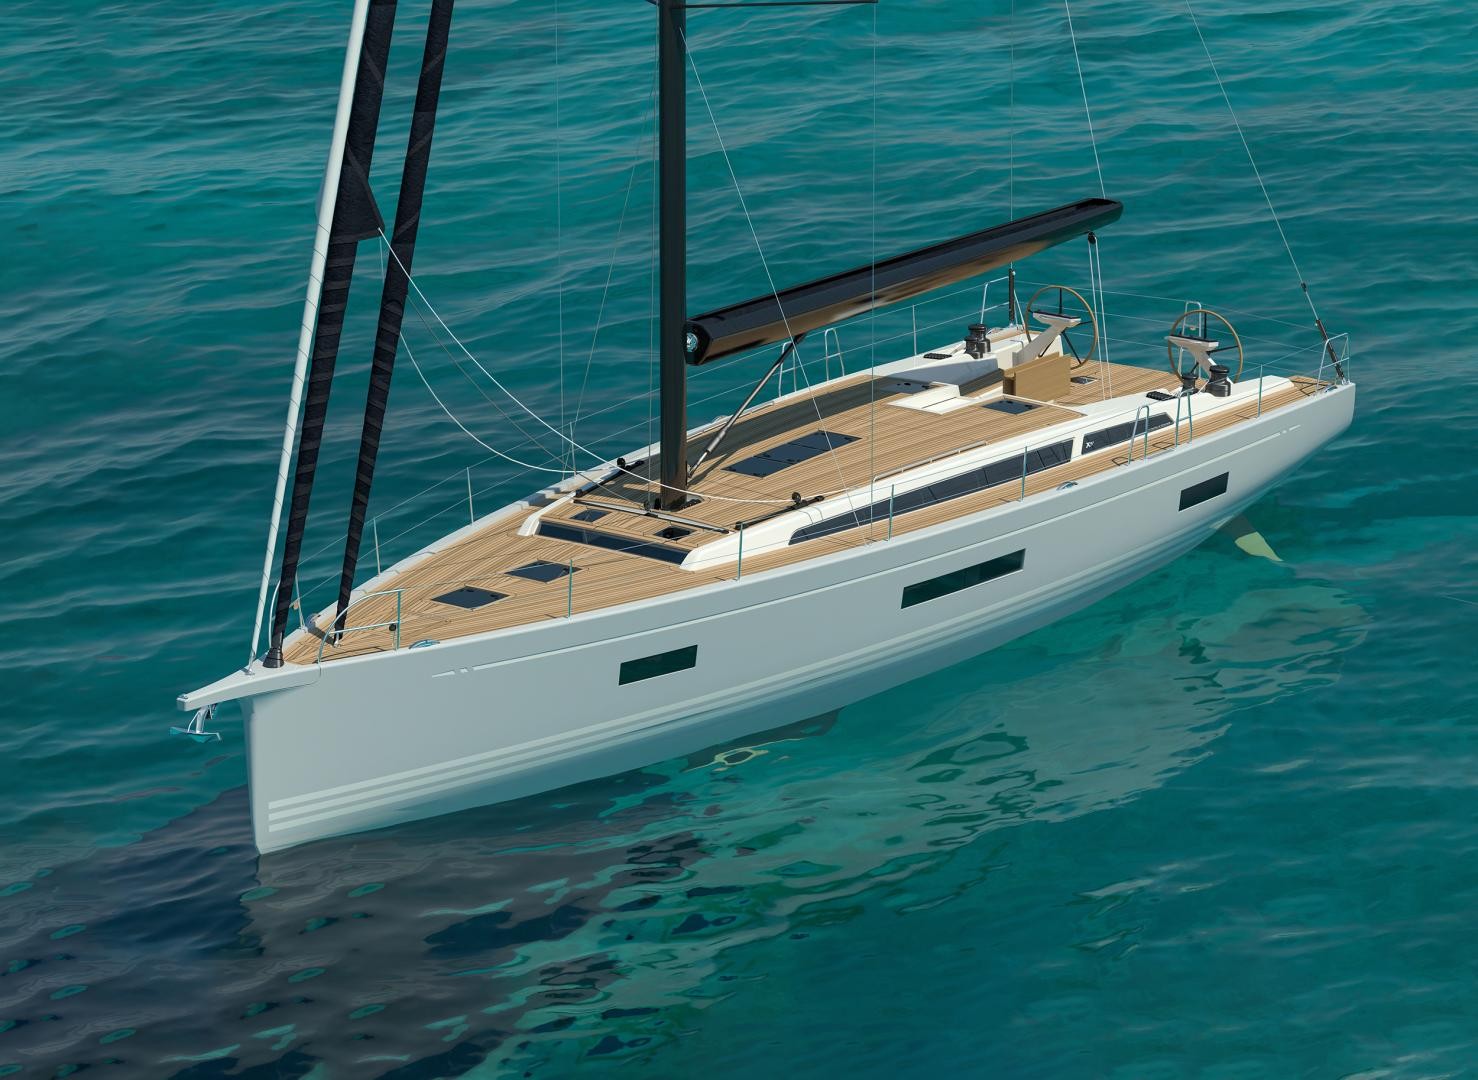 X-Yachts introduced at Boot two new “Pure X” models, 56 and 60ft